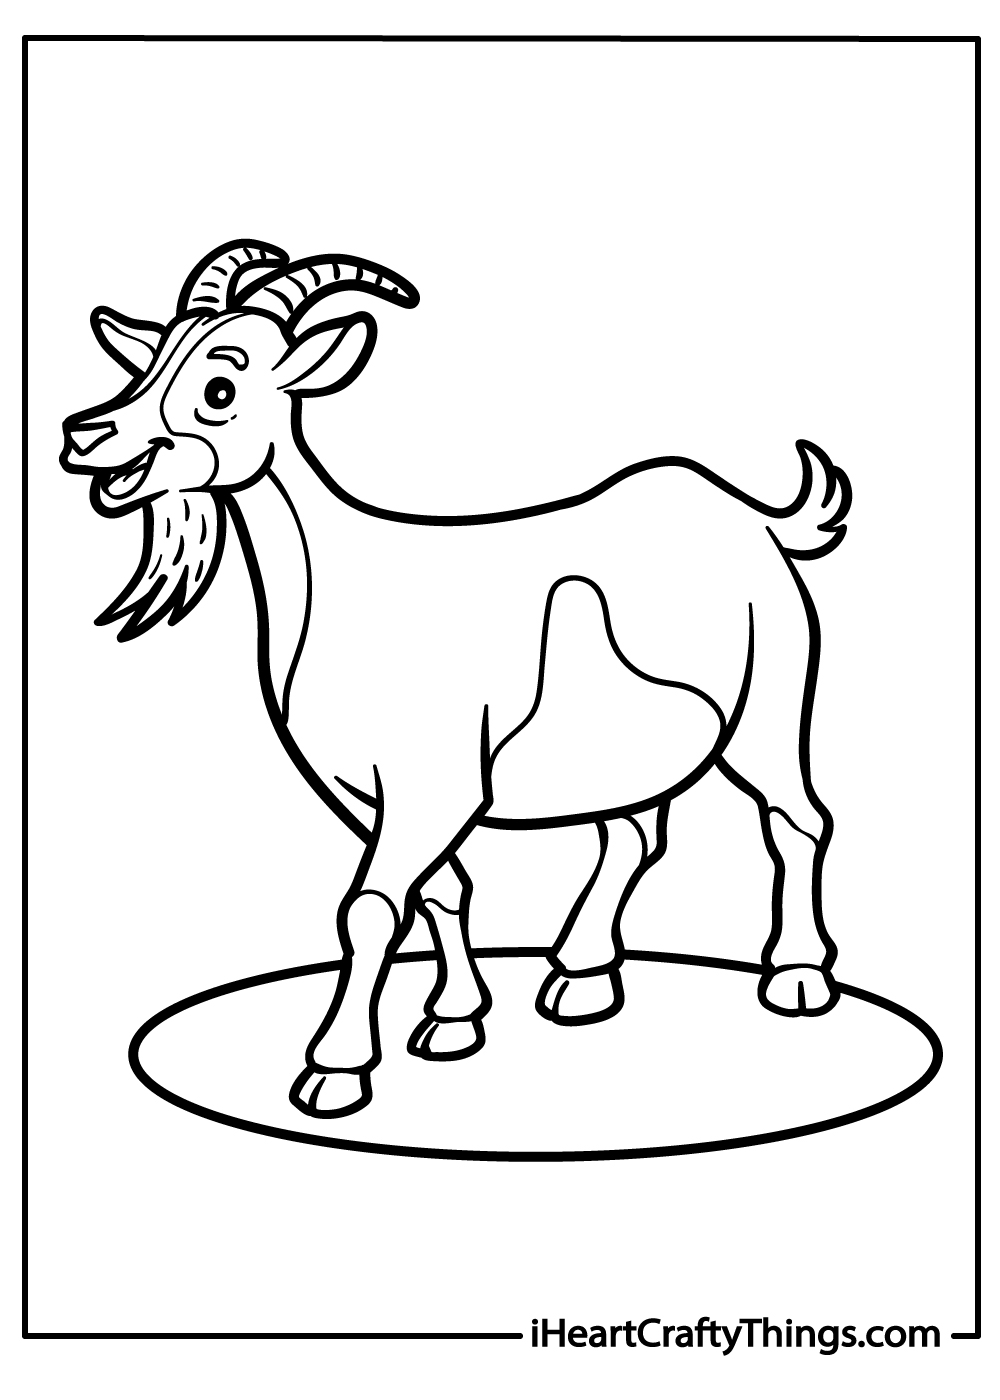 Goat coloring pages free printables